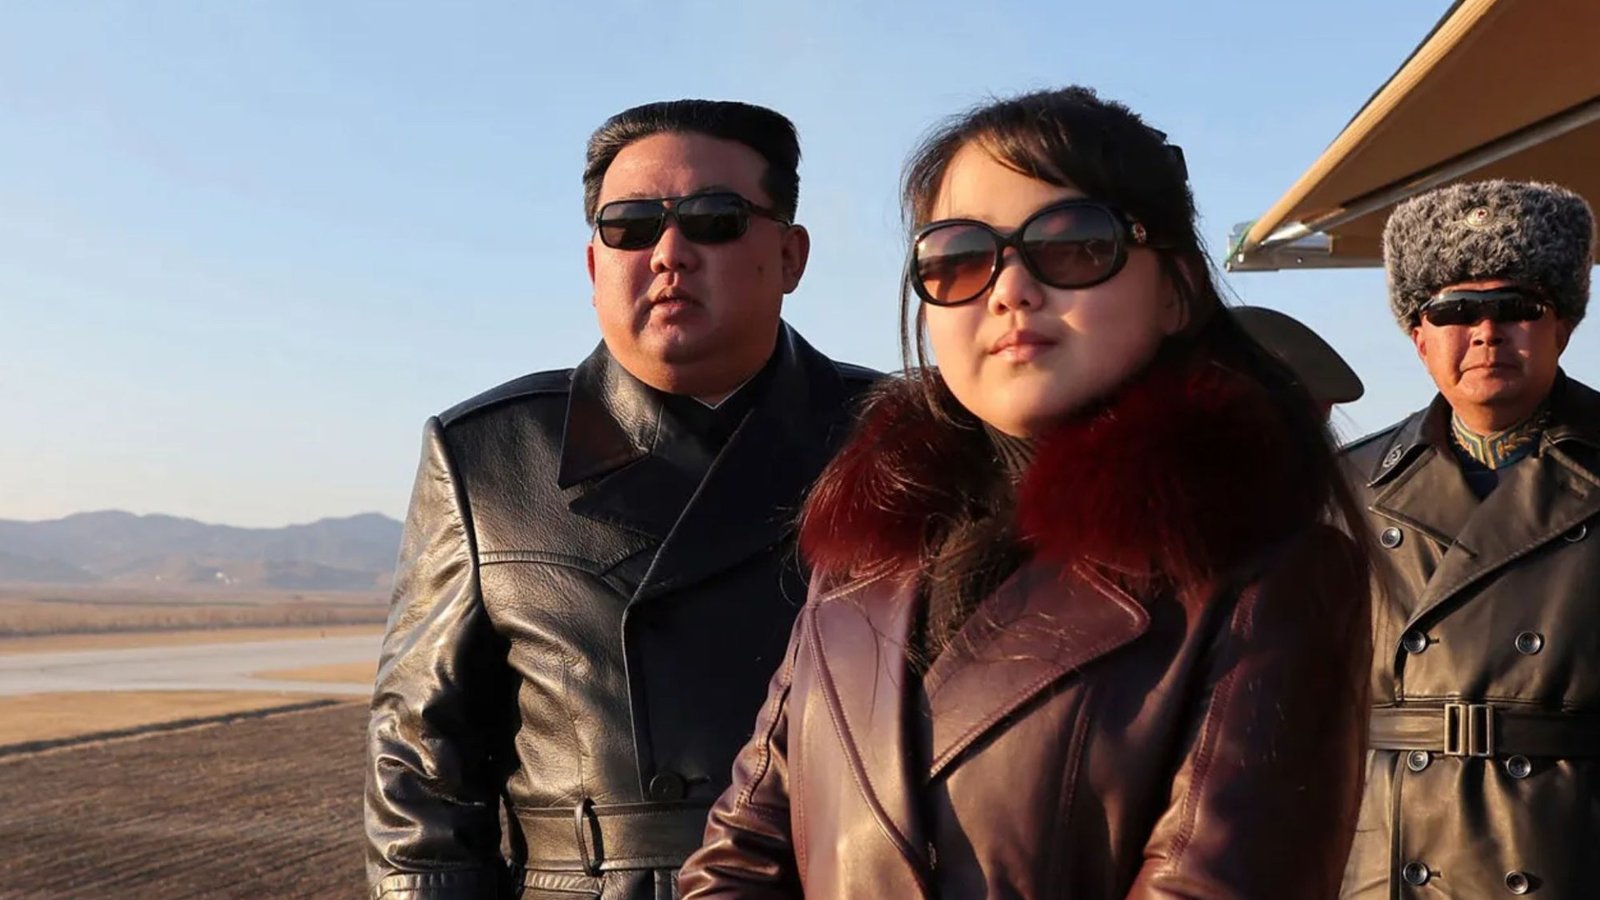 Key clue Kim Jong-un’s daughter will become North Korea’s next feared tyrant hidden in snaps with dictator dad